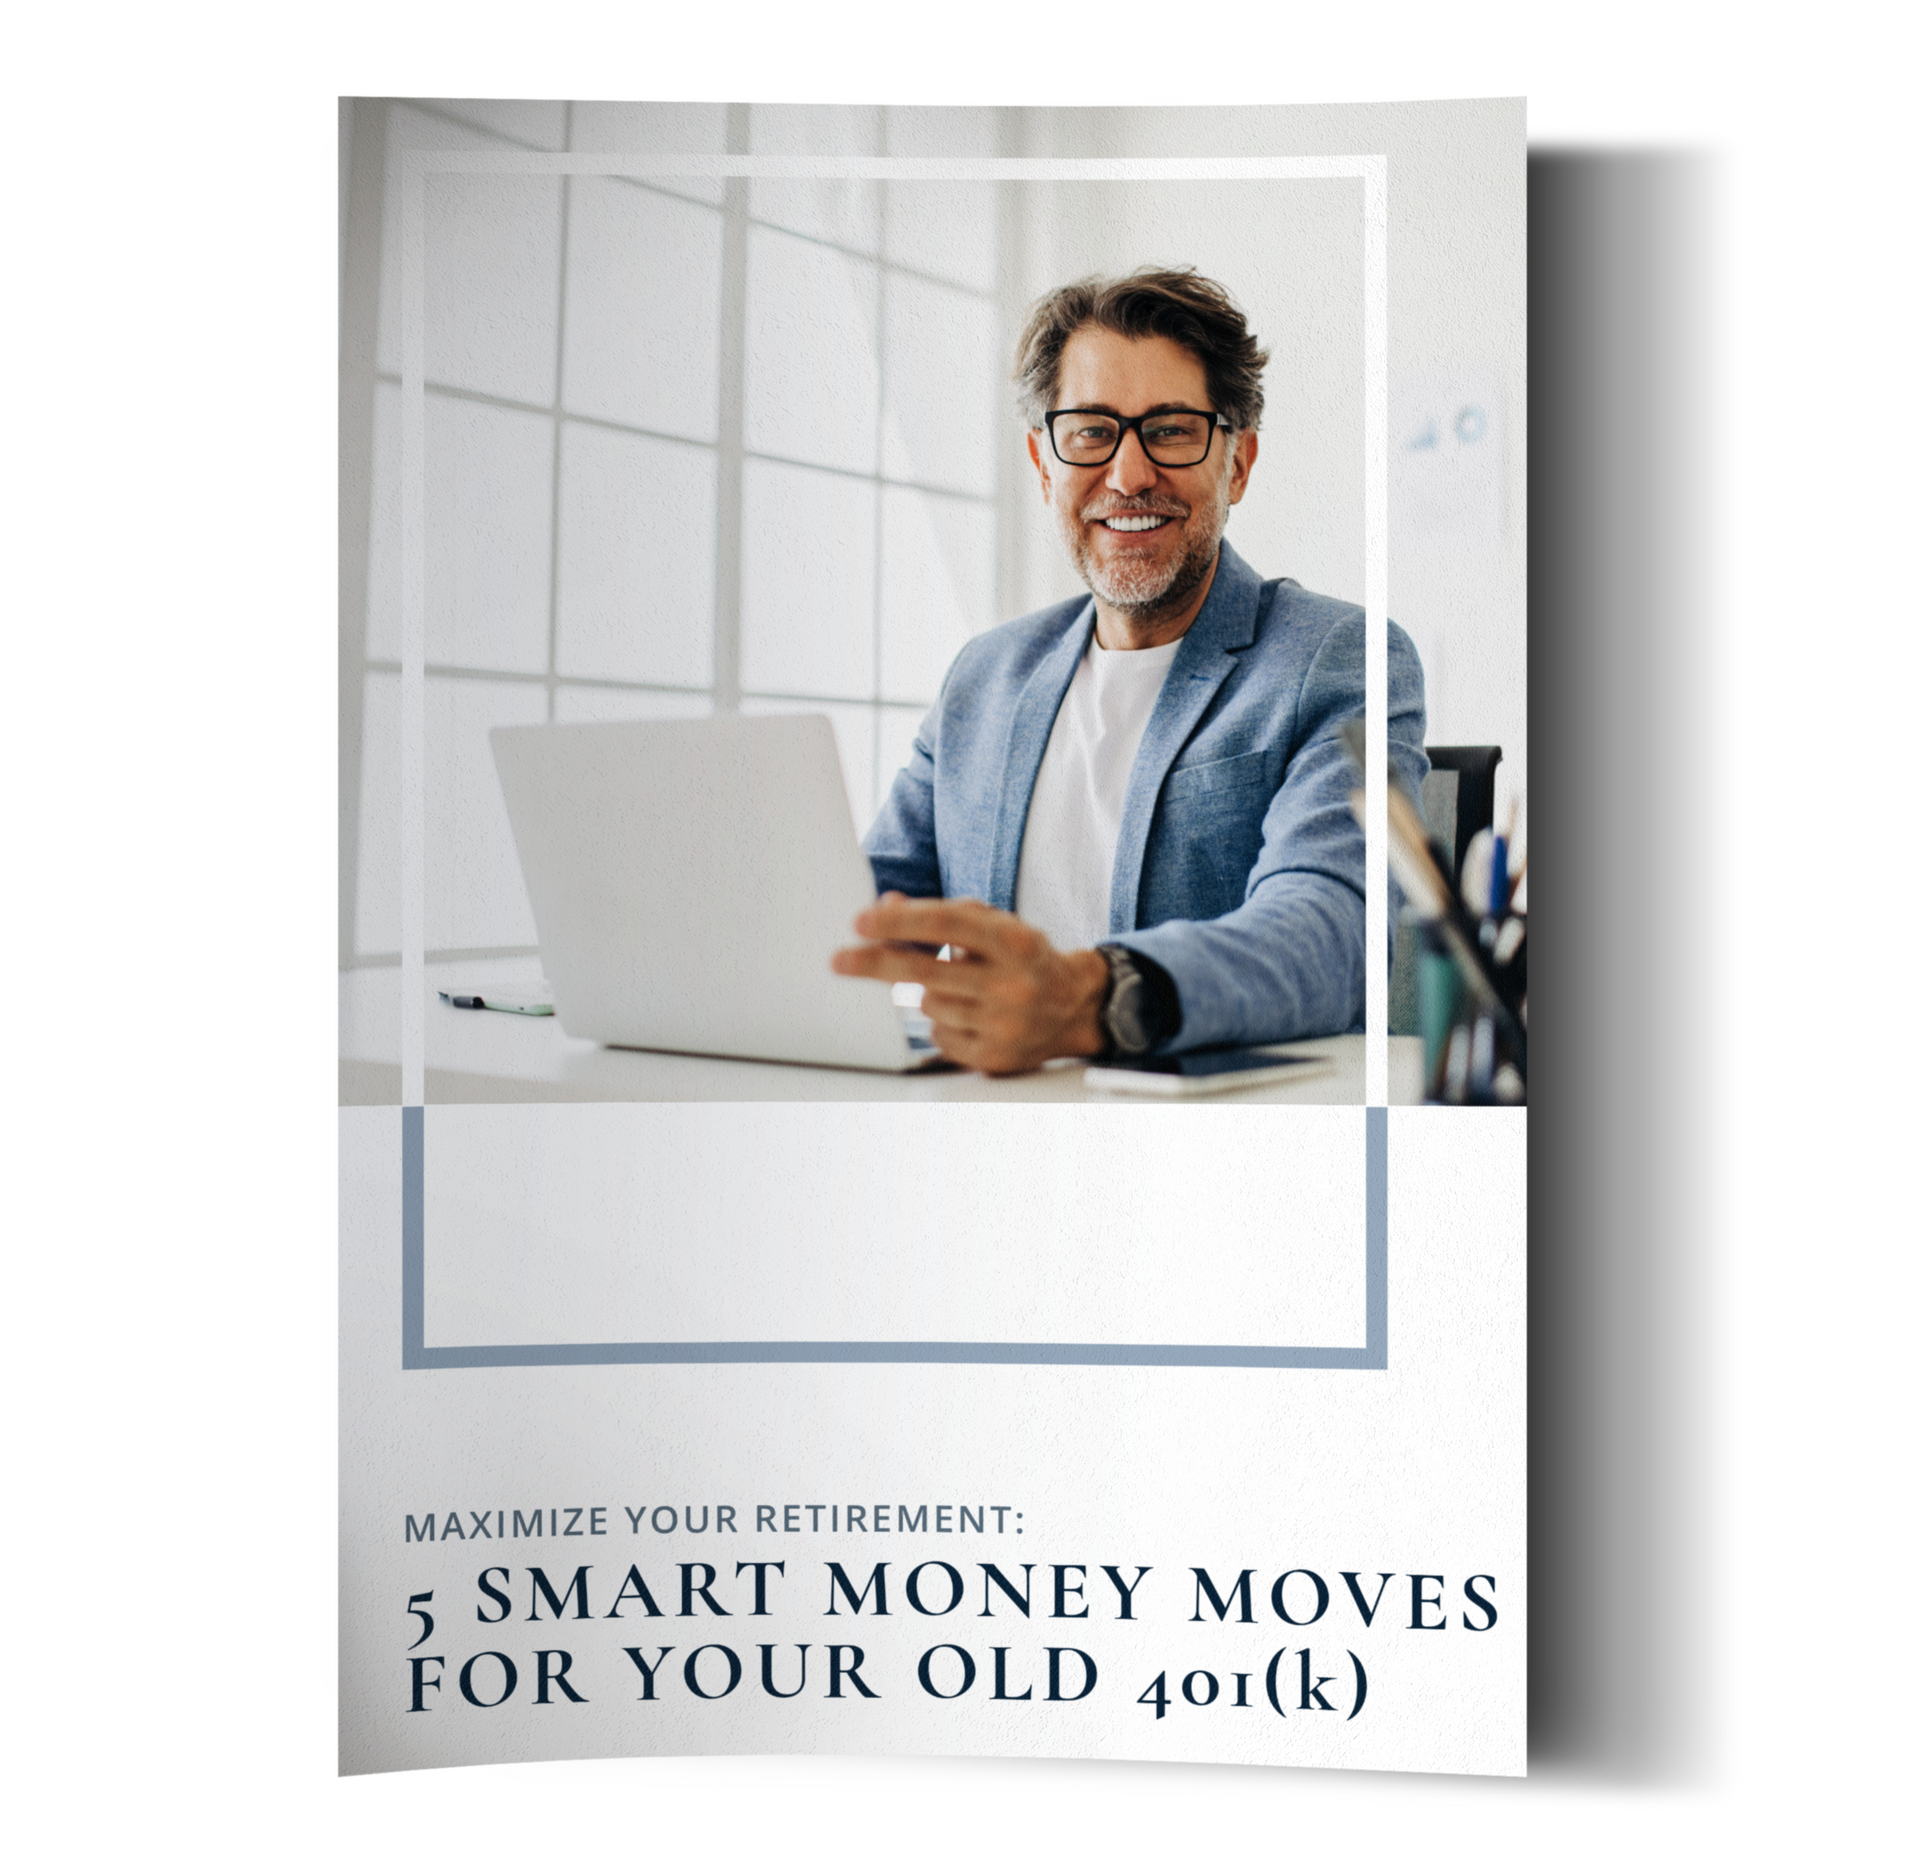 Maximize Your Retirement: 5 Smart Money Moves for Your Old 401(k)